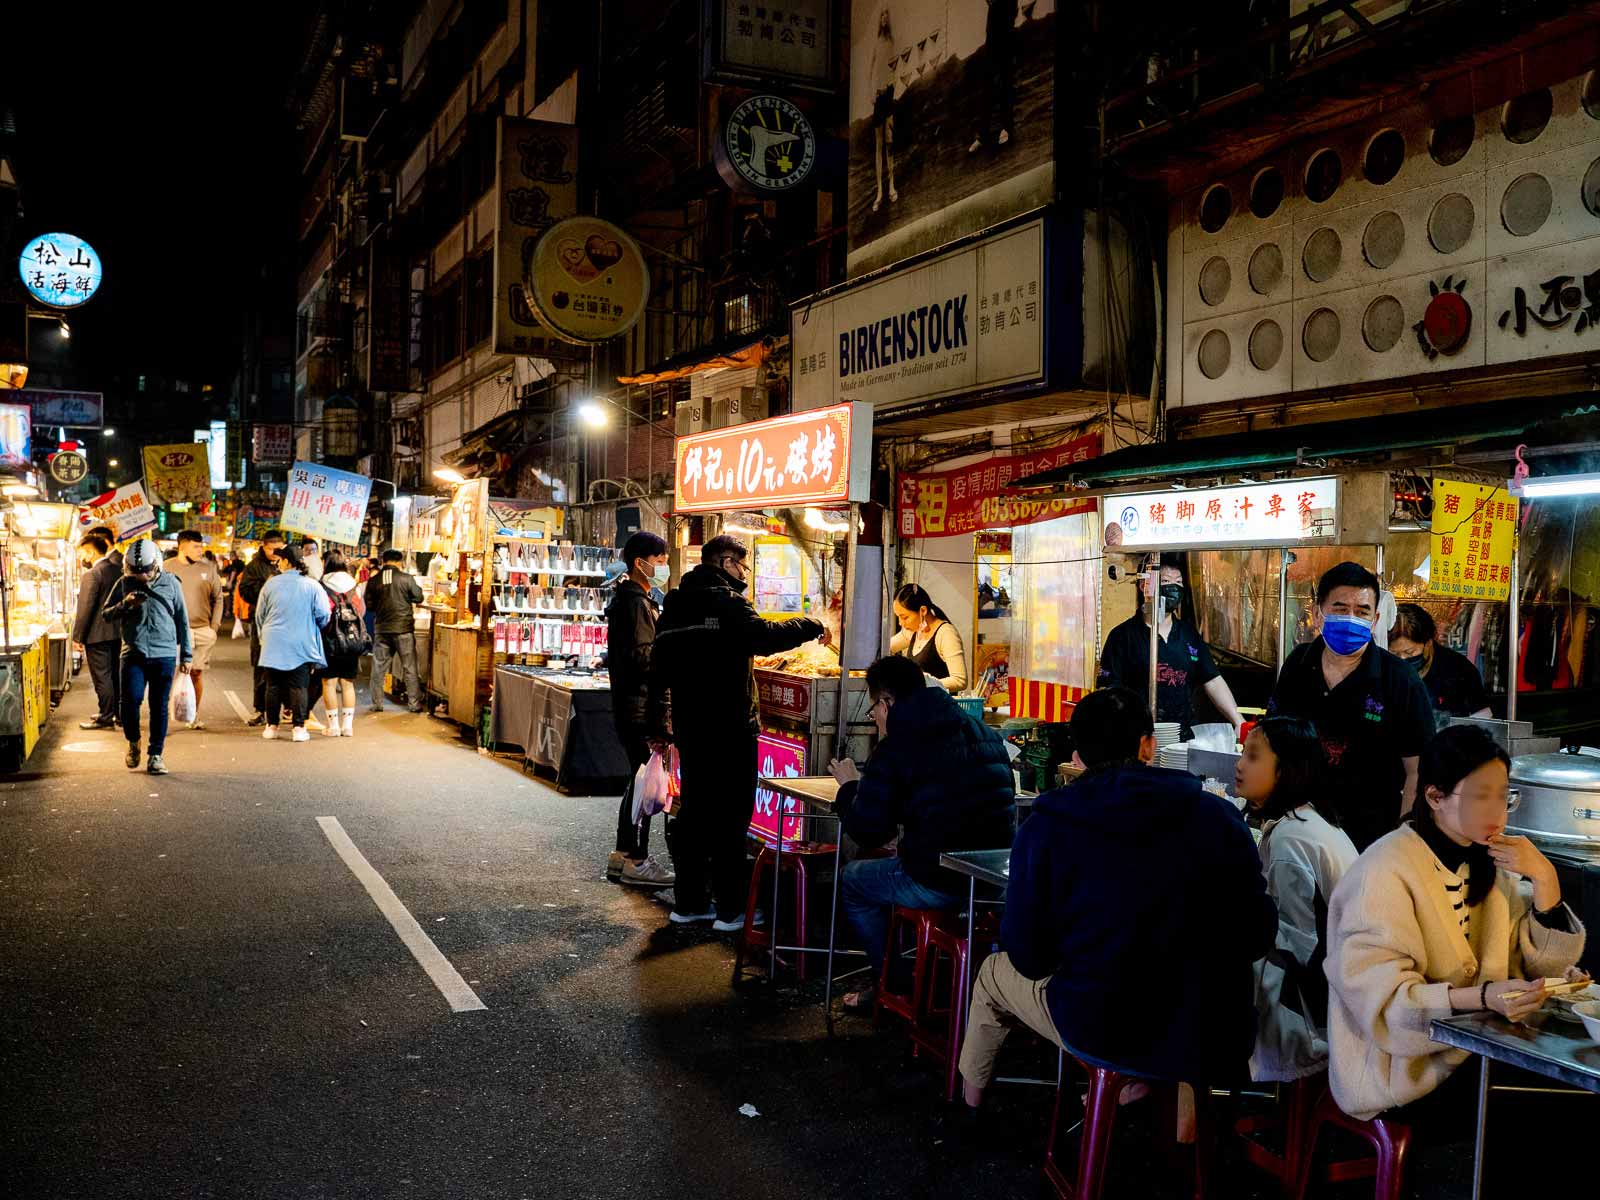 Food stands, tables and chairs line one side of the street in Keelung Night Market.